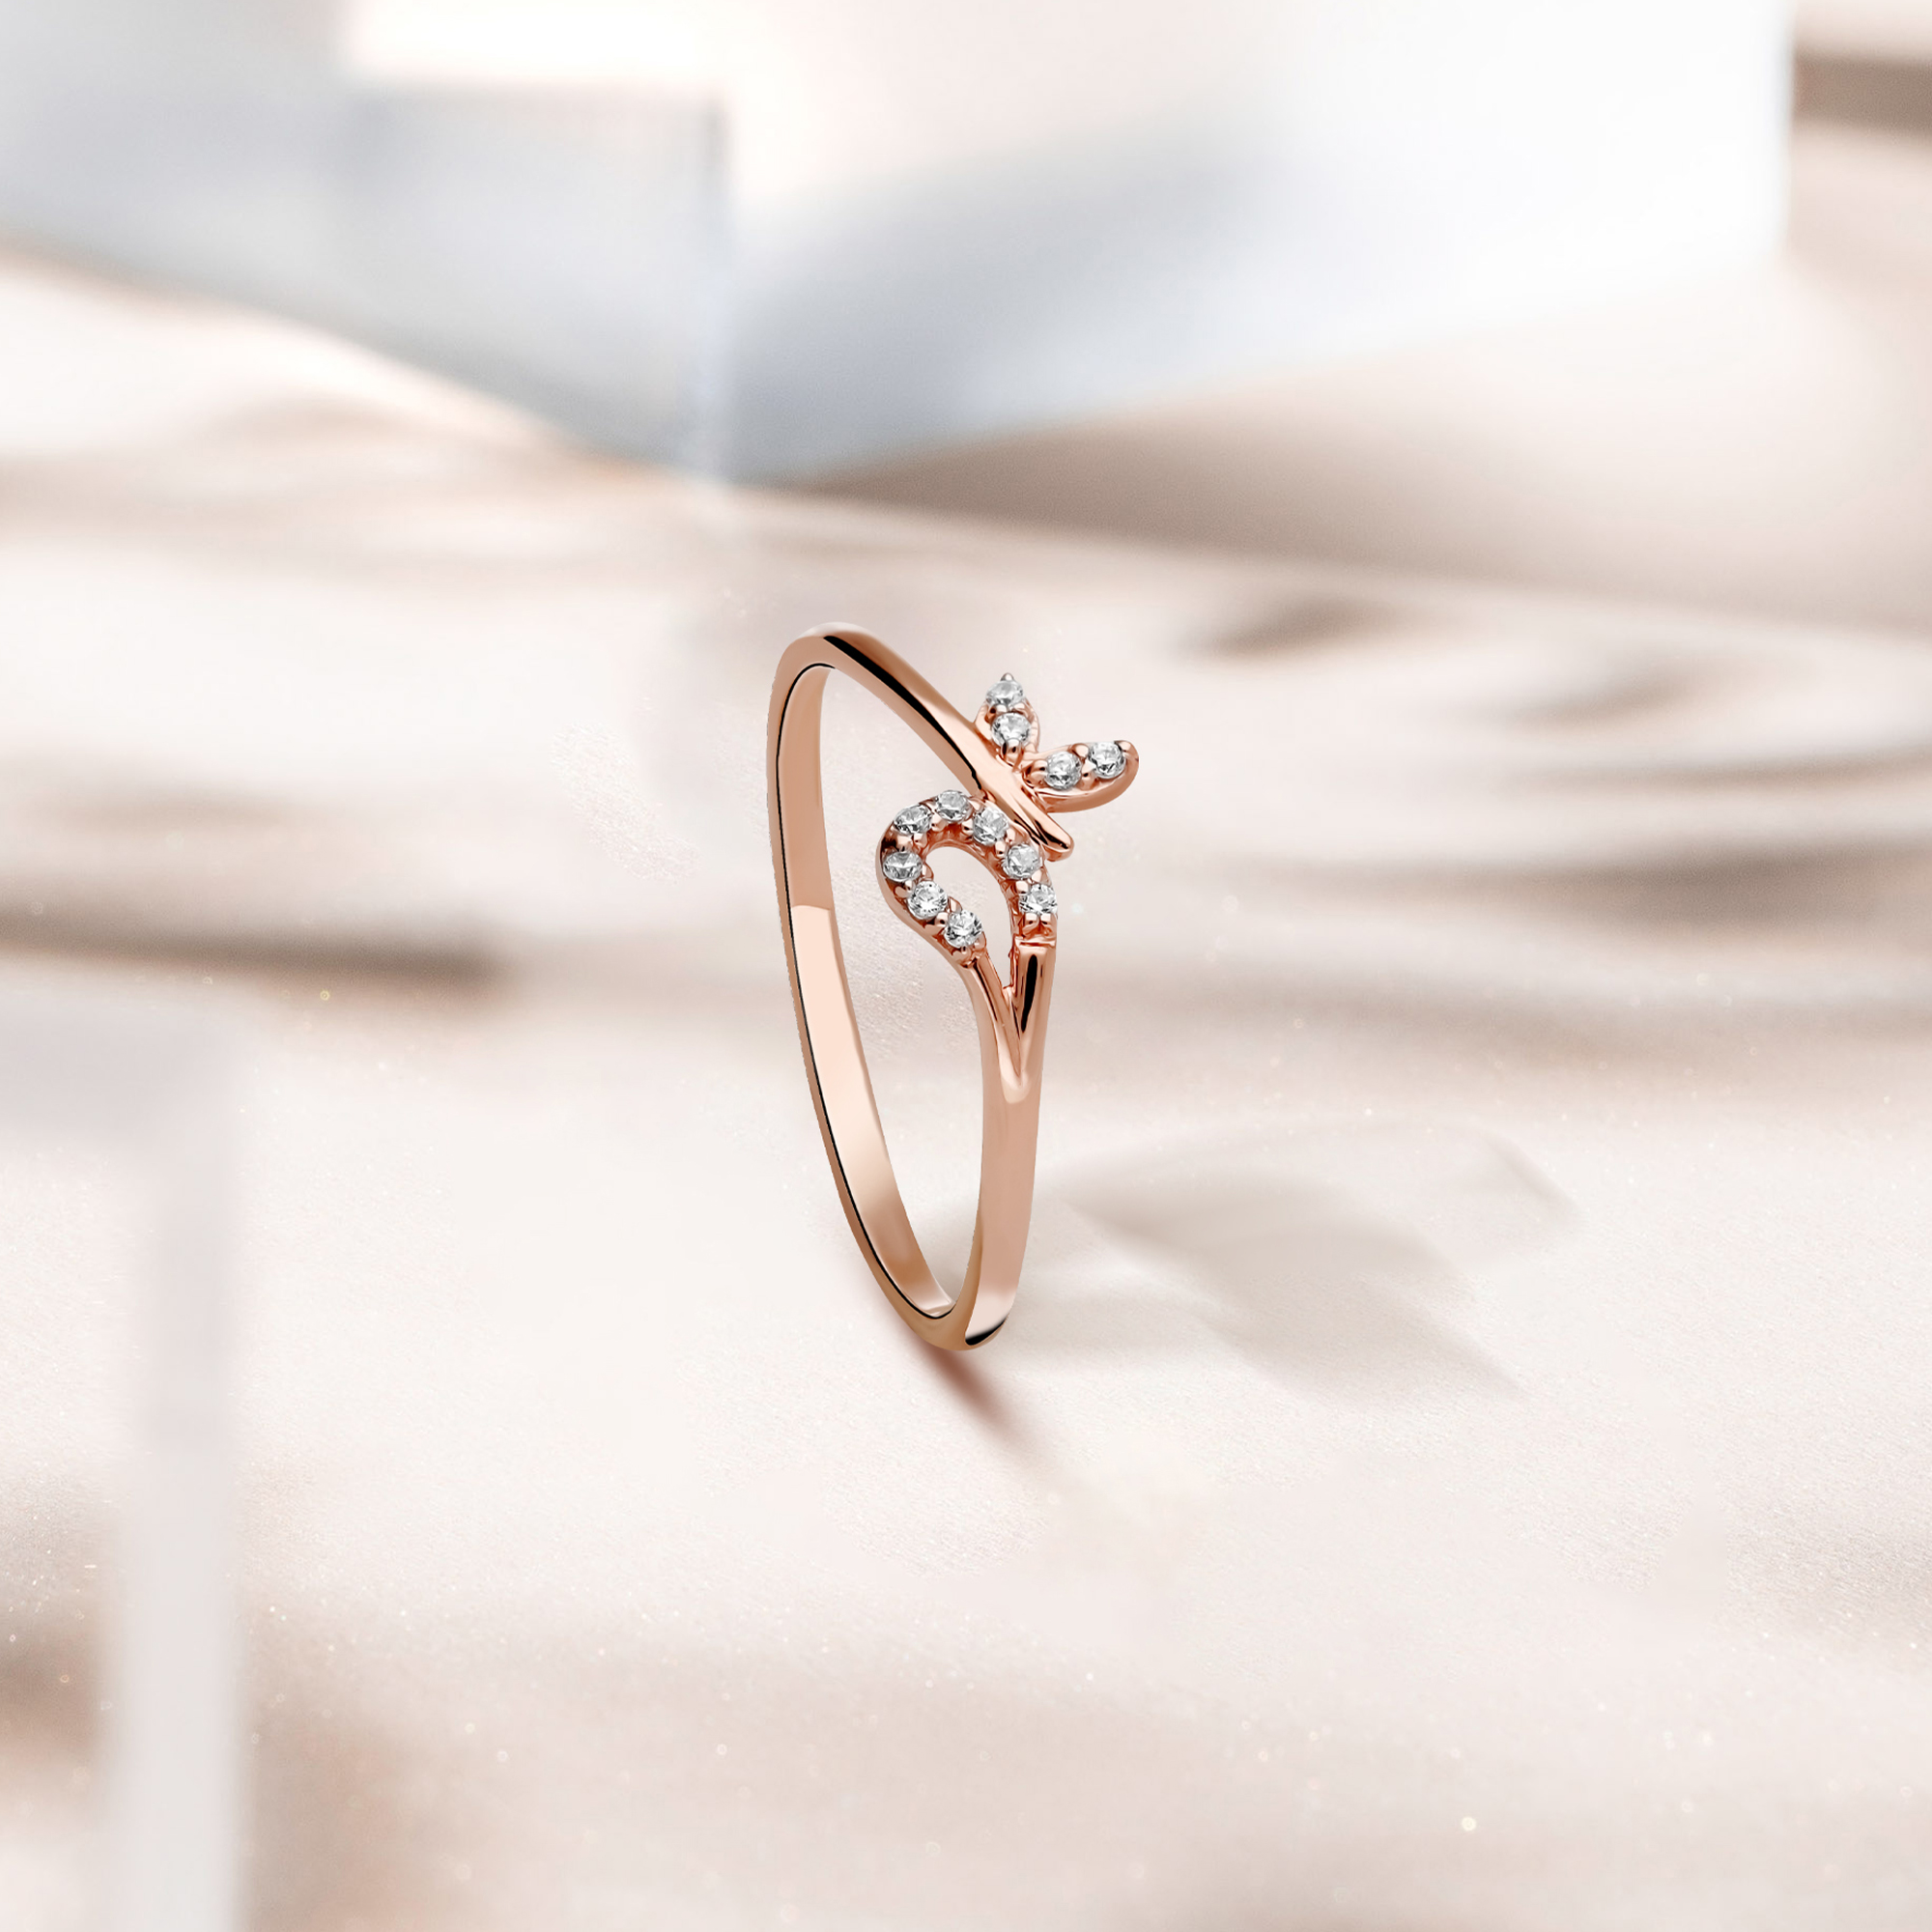 Unique Simple Infinity Design In 10K Rose Gold With Clear White Moissanite  Ring | eBay